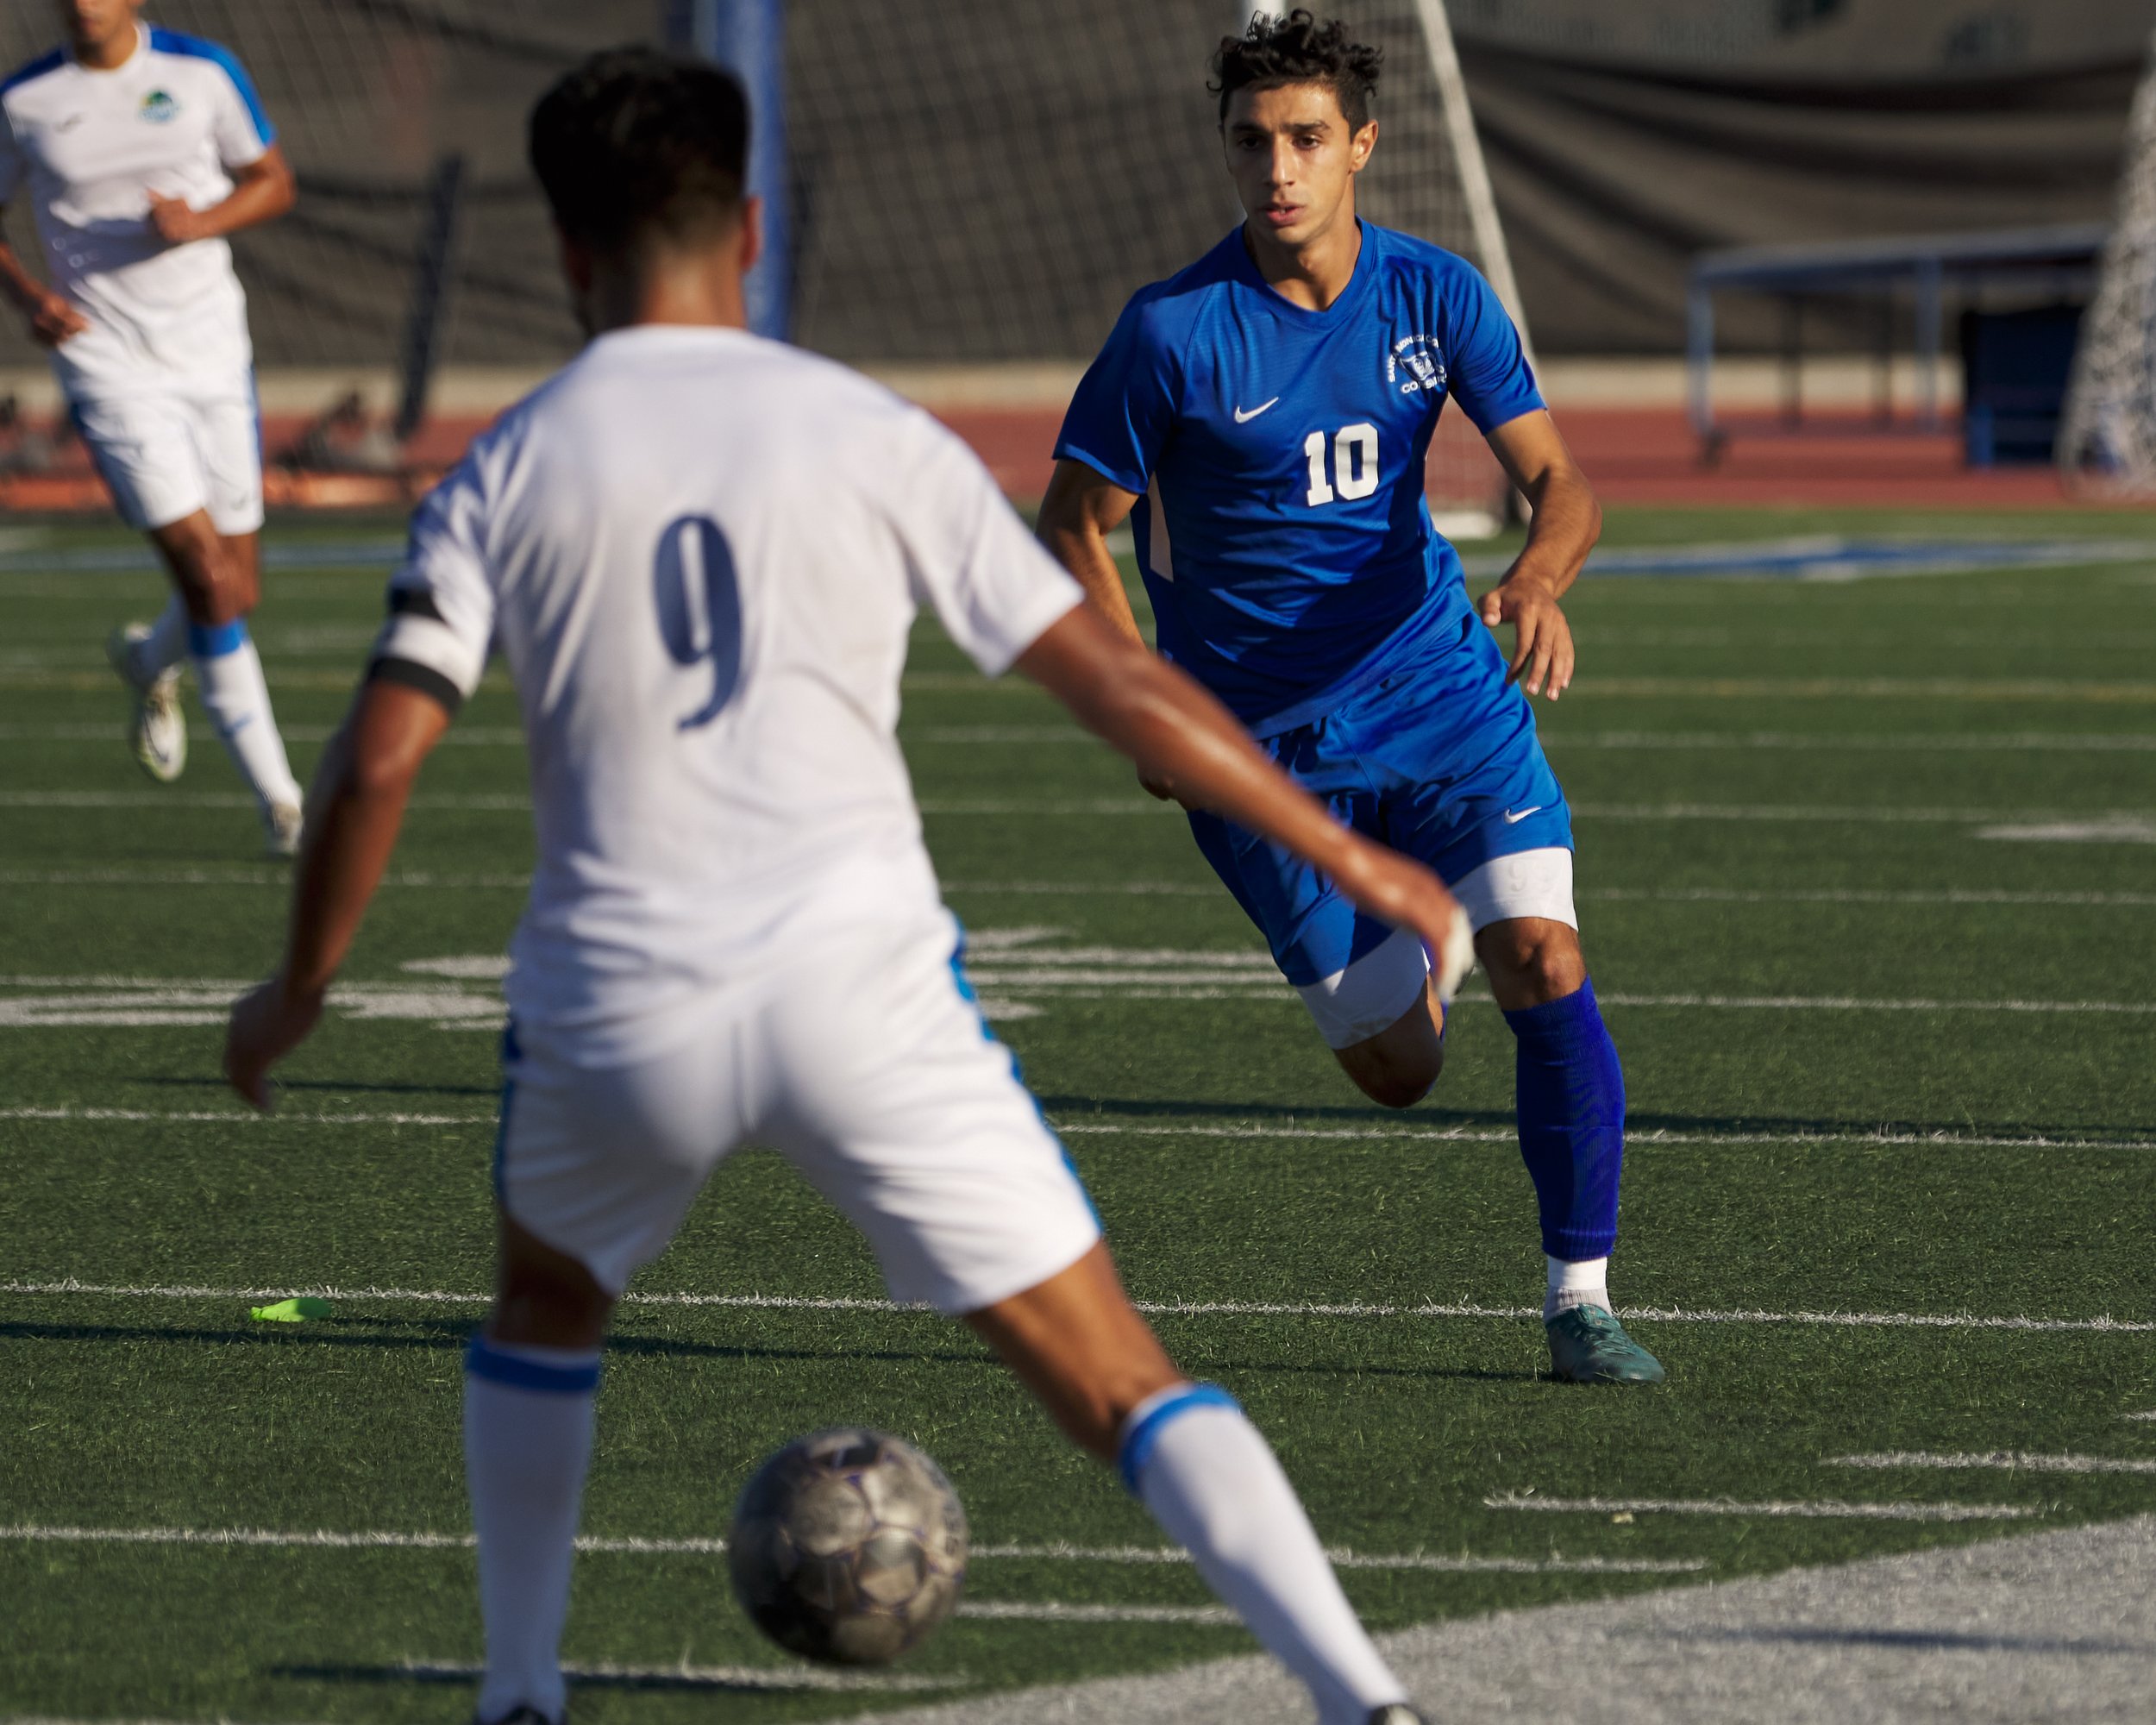  Santa Monica College Corsairs' Roey Kivity (right) and Oxnard College Condors' Ricardo Zizumbo (left) during the men's soccer match on Tuesday, Oct. 18, 2022, at Corsair Field in Santa Monica, Calif. The Corsairs lost 0-3. (Nicholas McCall | The Cor